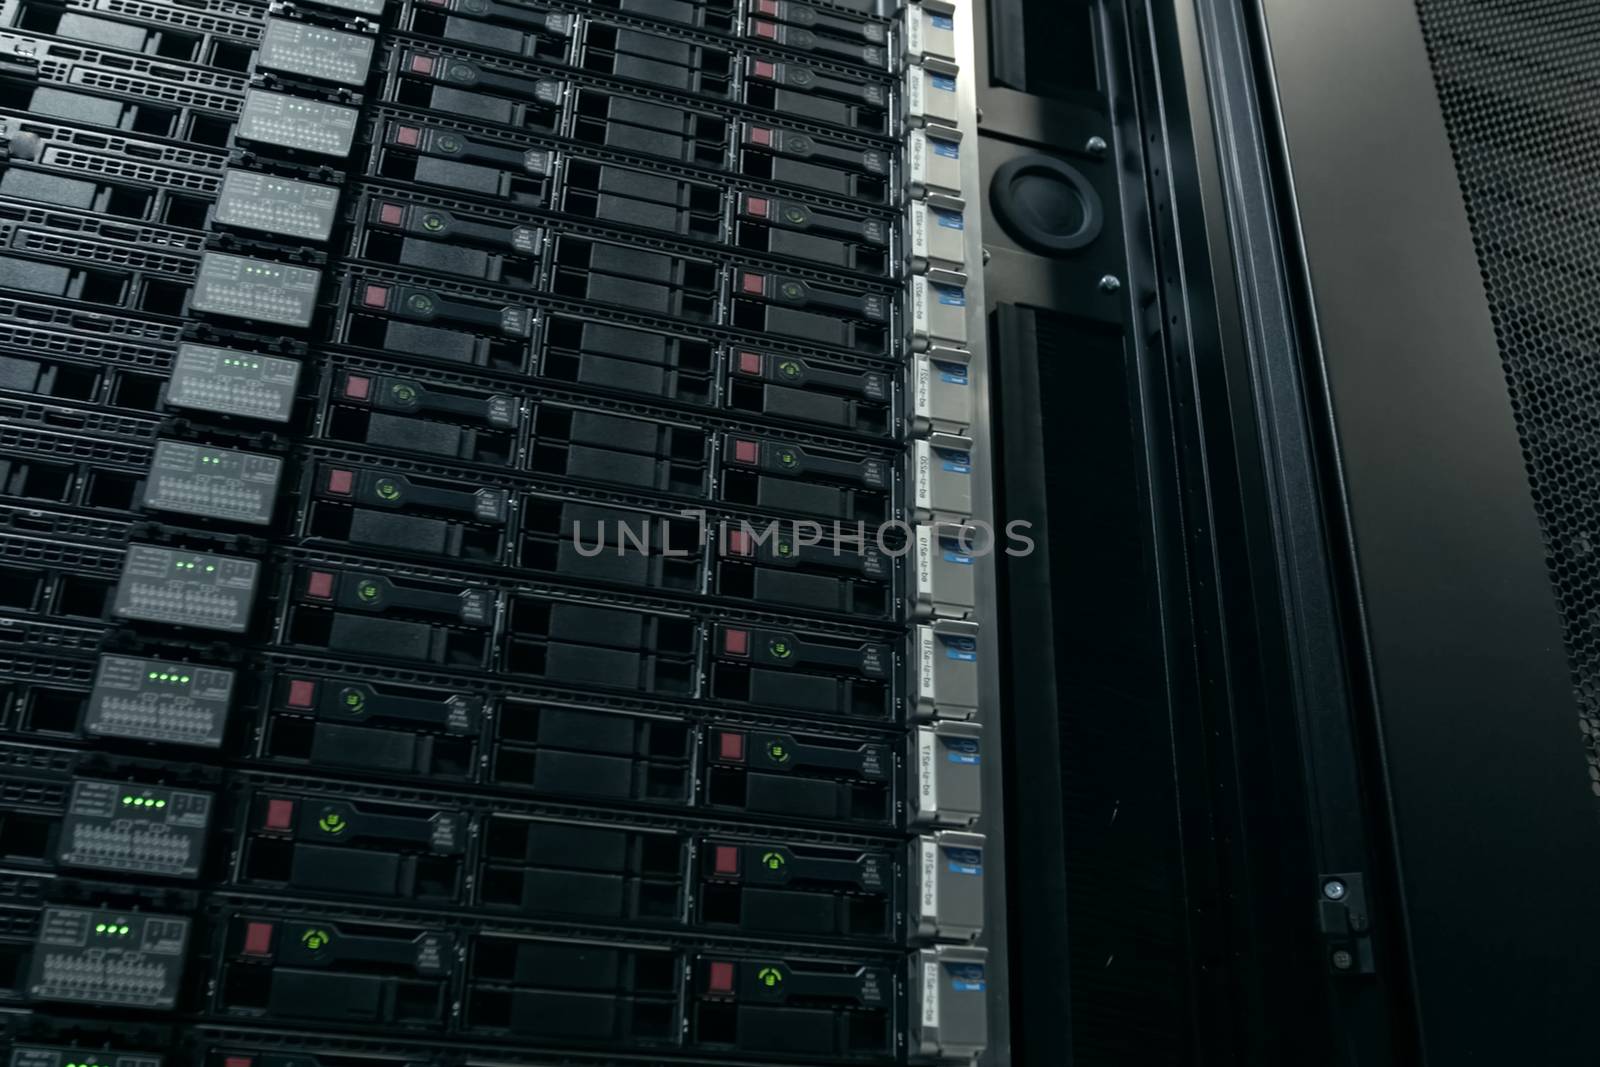 Equipment on the shelves is the data center. Server date centers by nyrok